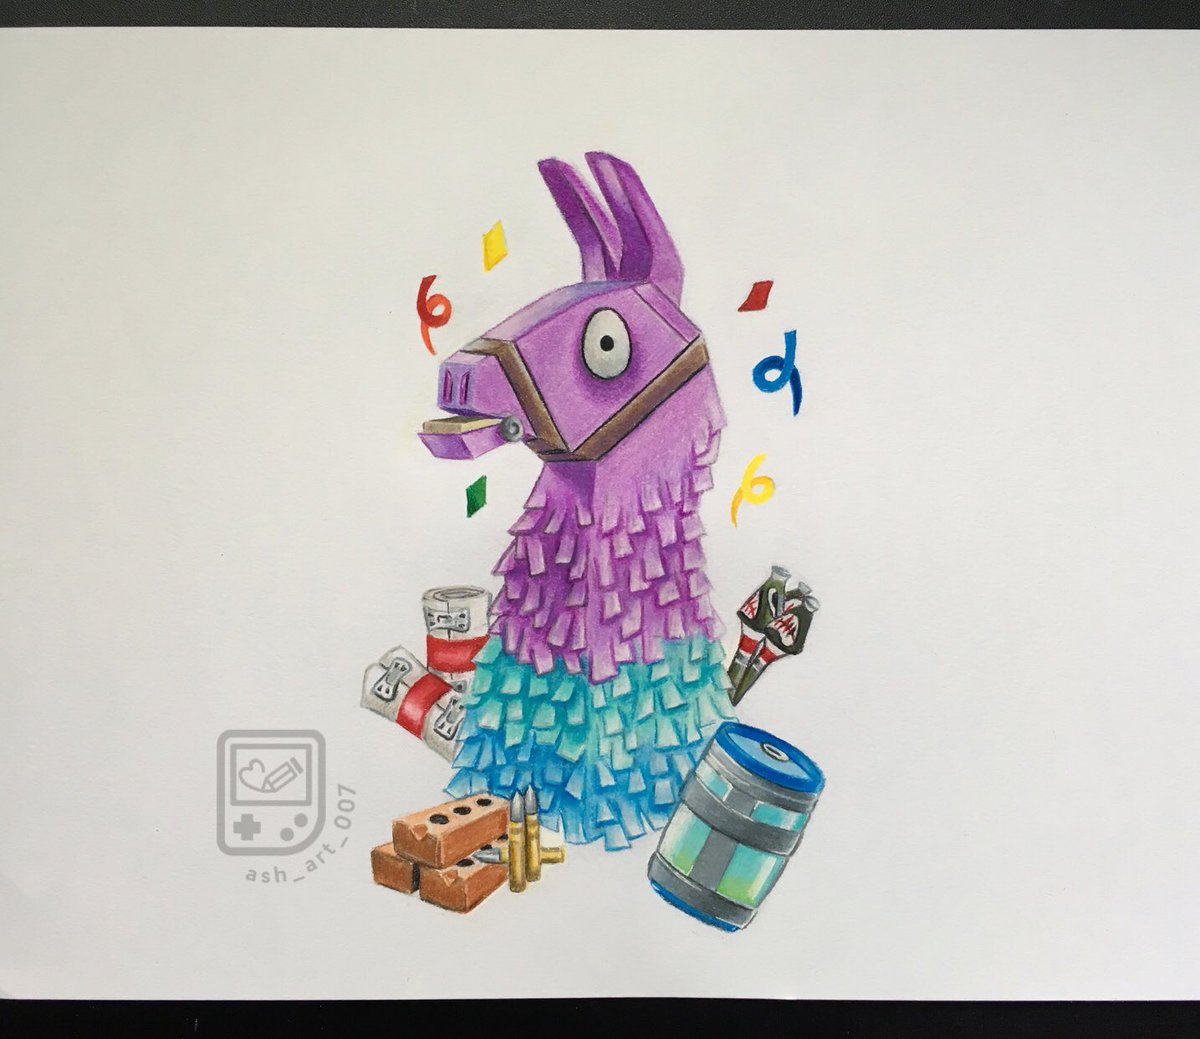 Ash On Twitter Fortnite Llamas Are Life Drawing Done With Prismacolors Fortnitegame Fortnite Fortnitebattleroyale Fortnitebr Fortnitellama Llama Pc Xbox Ps4 Https T Co Zy9hyjaqu5